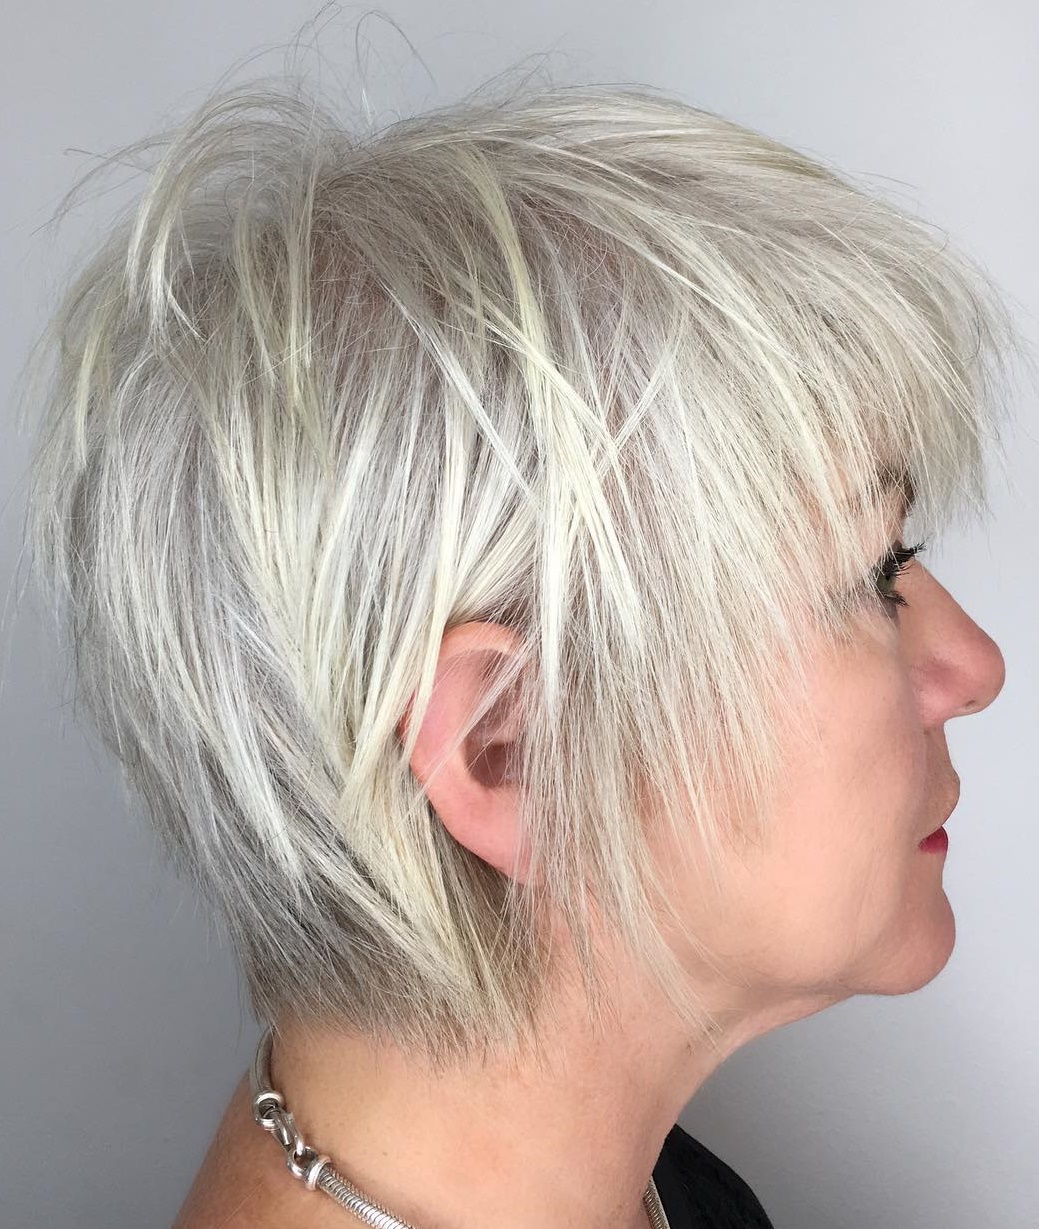 60 Trendiest Hairstyles And Haircuts For Women Over 50 In 2021 50 gorgeous hairstyles and haircuts for women over 50. haircuts for women over 50